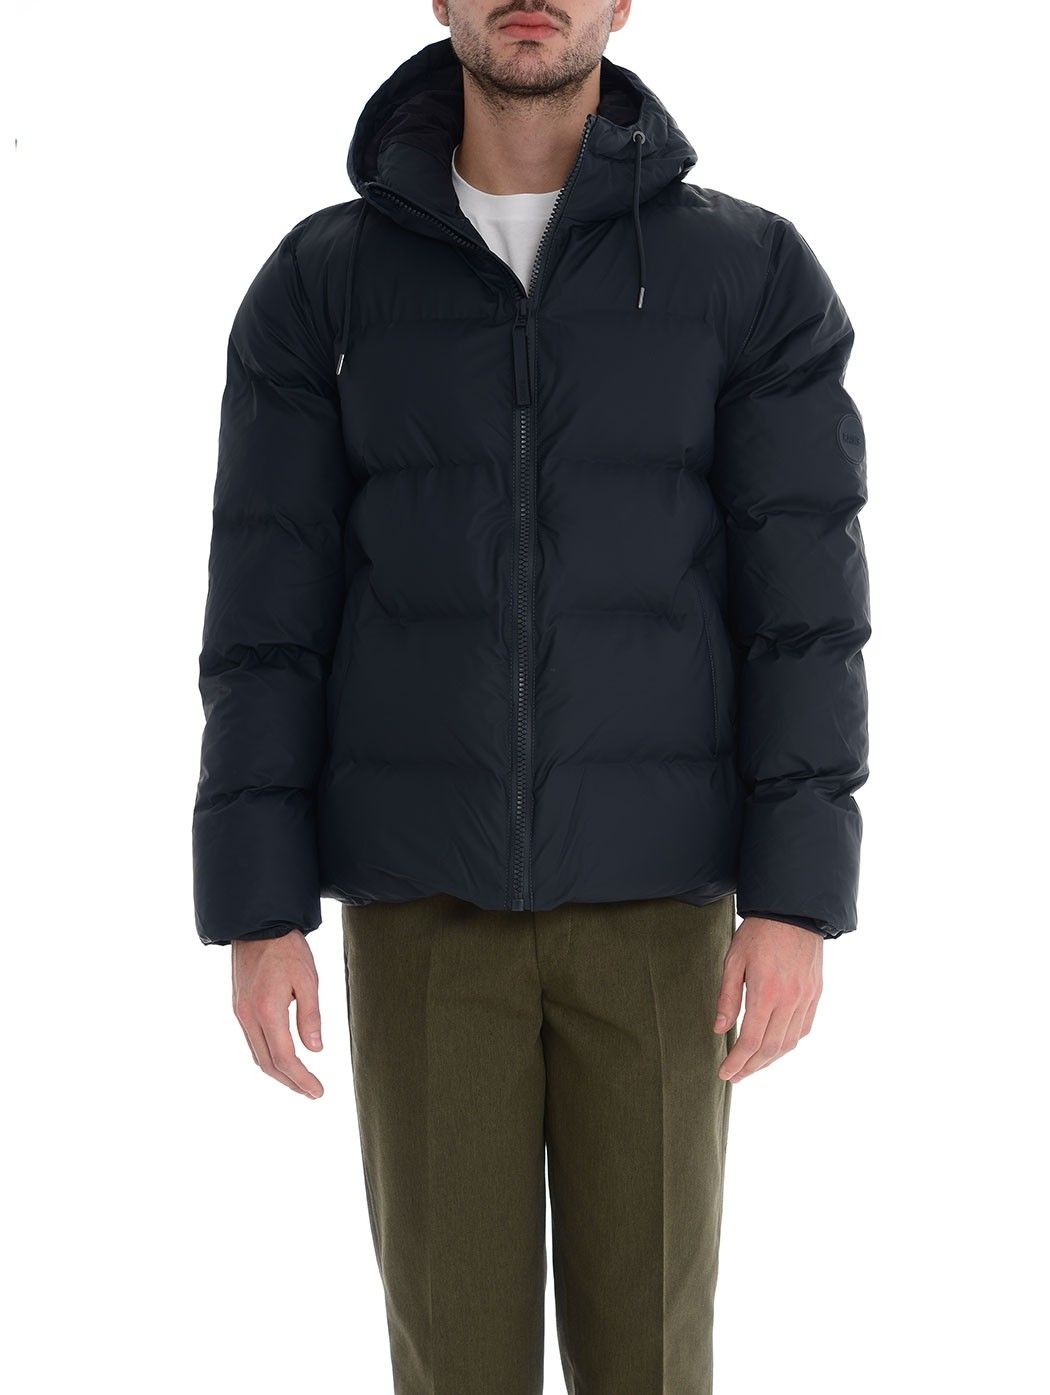  MAN COLLECTION,FALL WINTER,CHURCH'S,MONCLER,MONCLER GRENOBLE,HERNO,WOOLRICH,MSGM,NEIL BARRETT,STONE ISLAND,BLUNDSTONE  RAINS A-PUFFER-JACKET